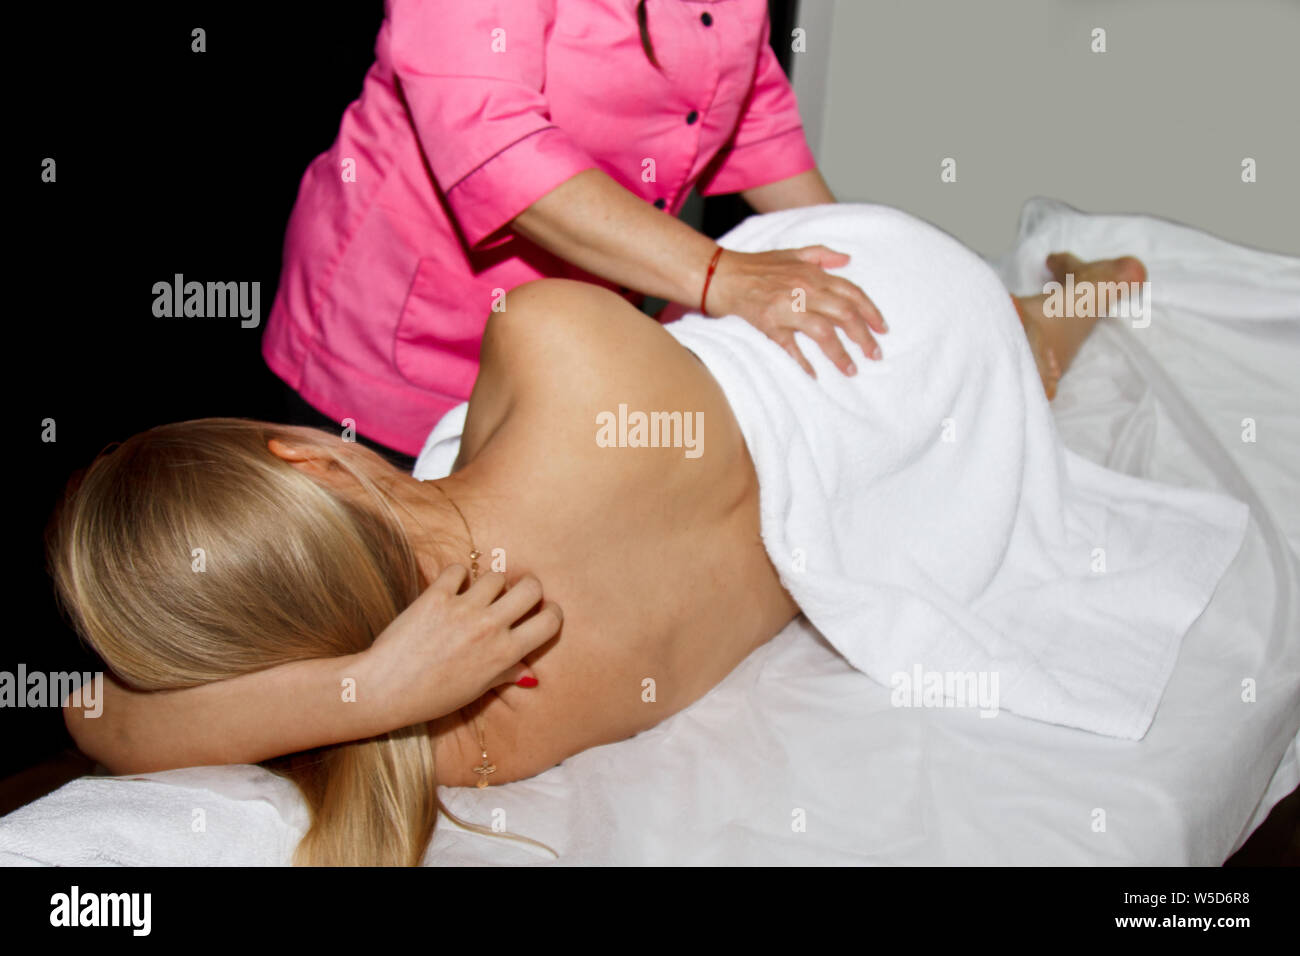 professional therapeutic massage. girl the athlete in a massage room. body and health care image